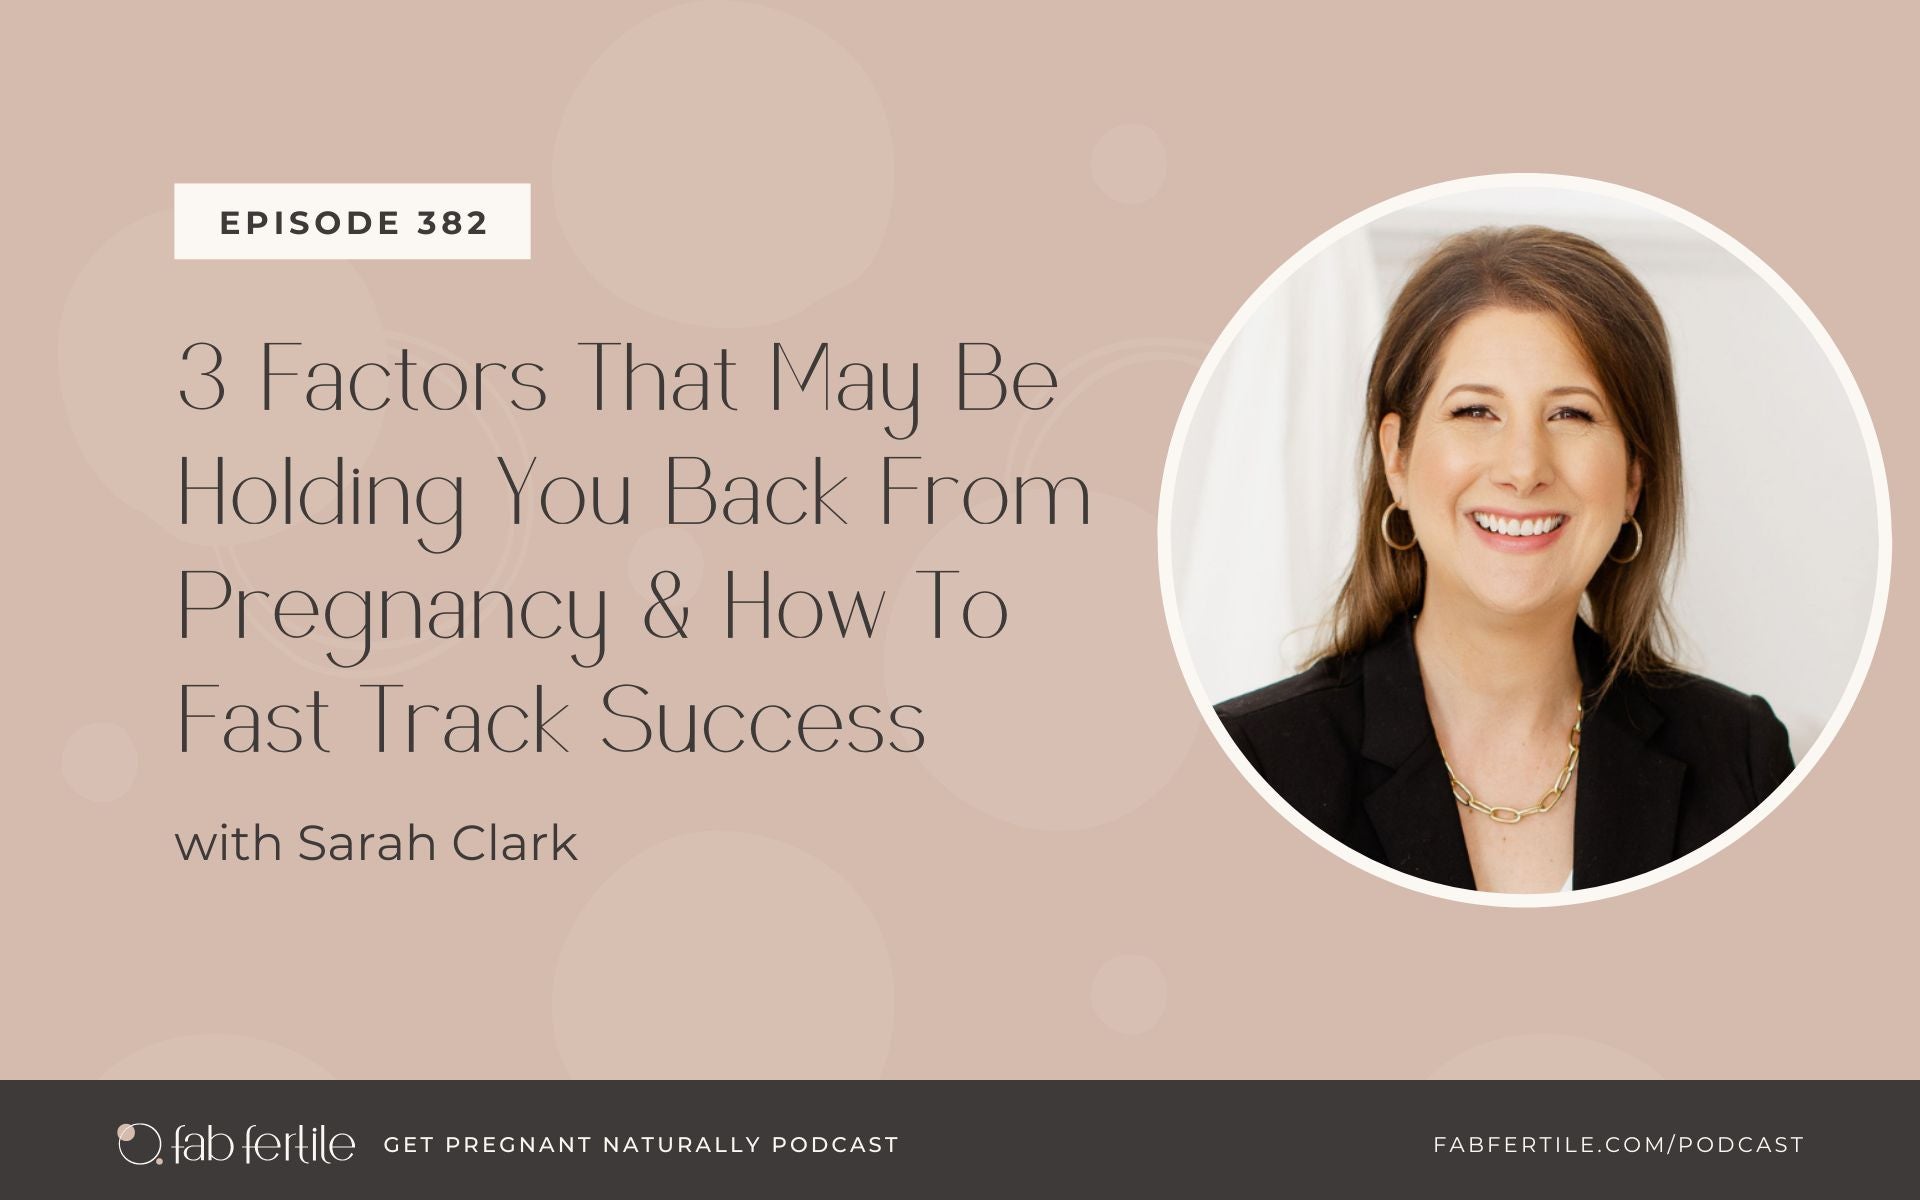 3 Factors That May Be Holding You Back From Pregnancy and How To Fast Track Success